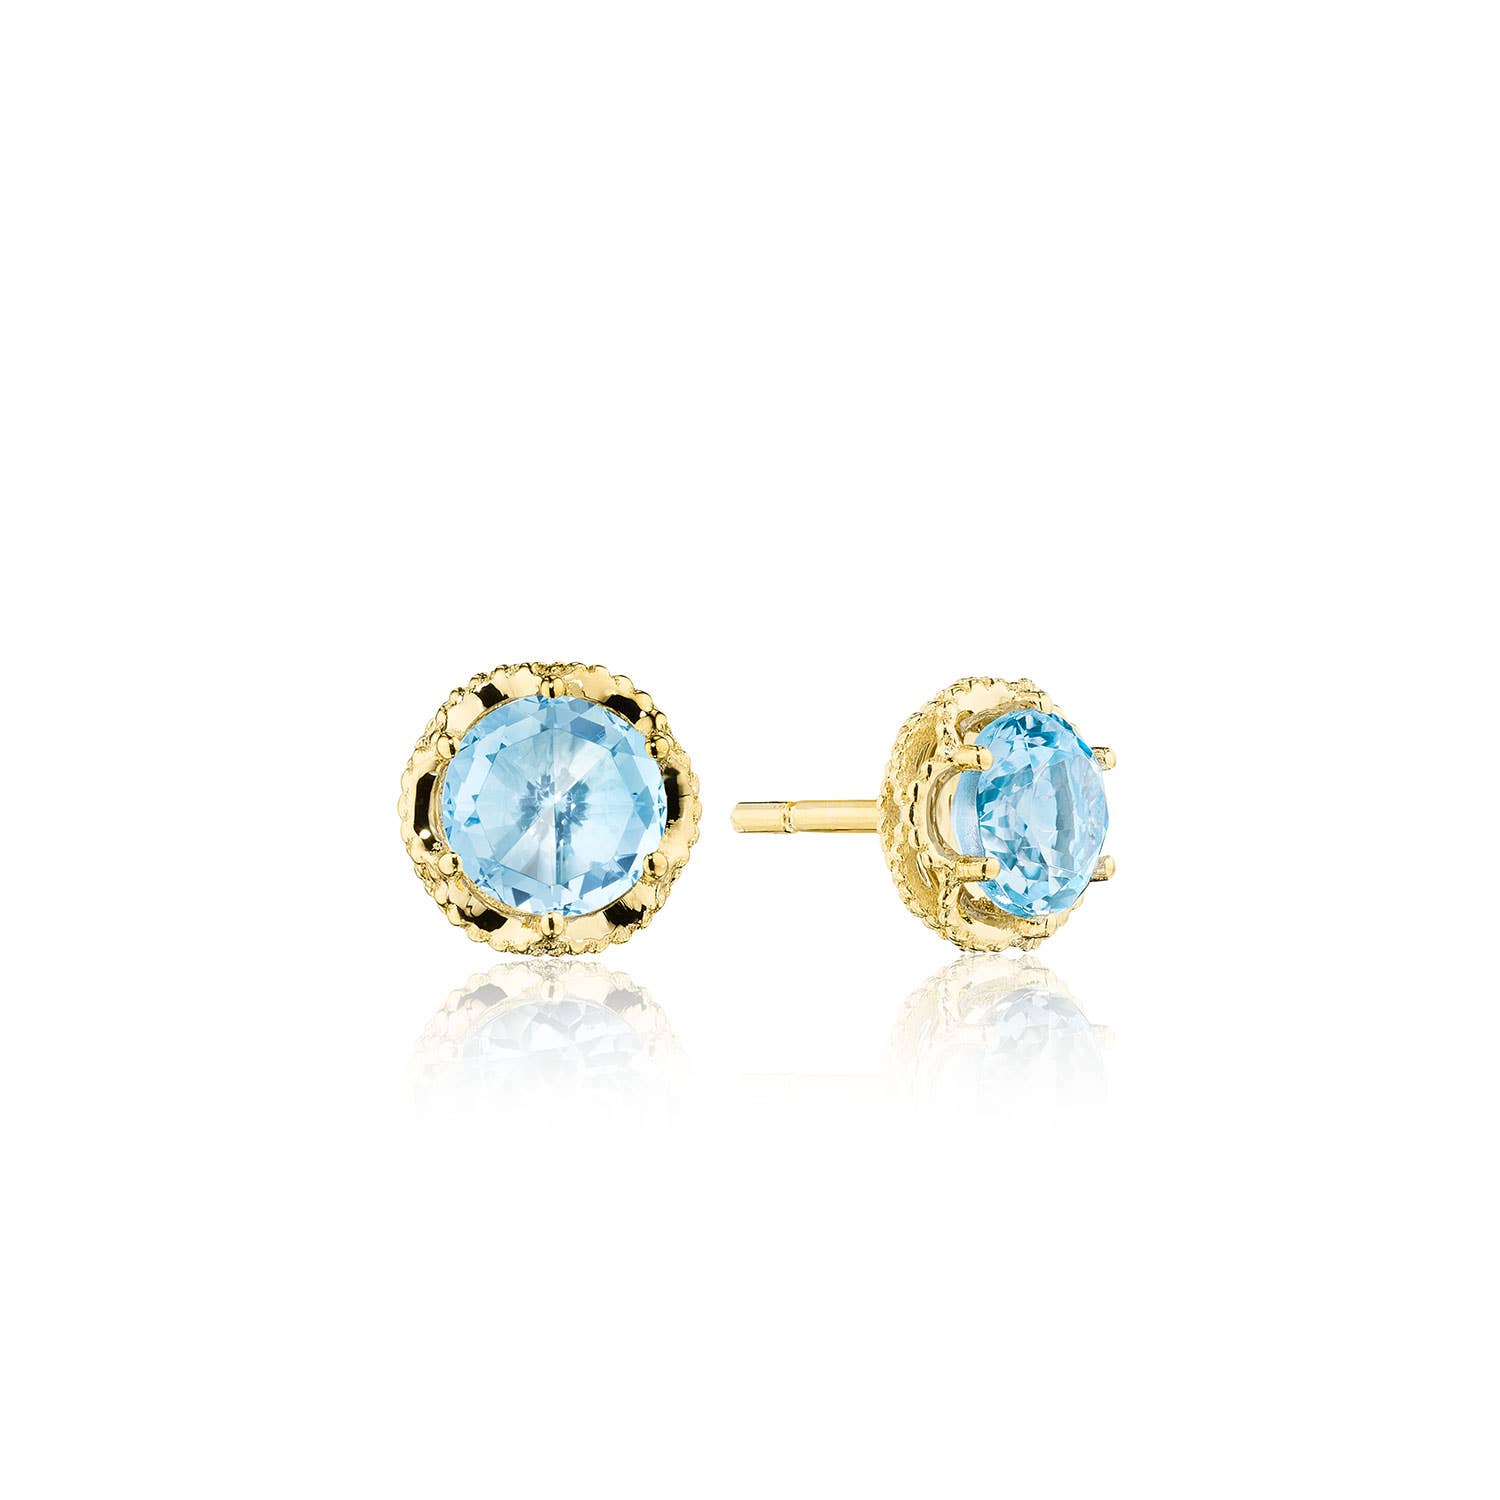 Petite Crescent Crown Studs featuring Sky Blue Topaz and Yellow Gold 